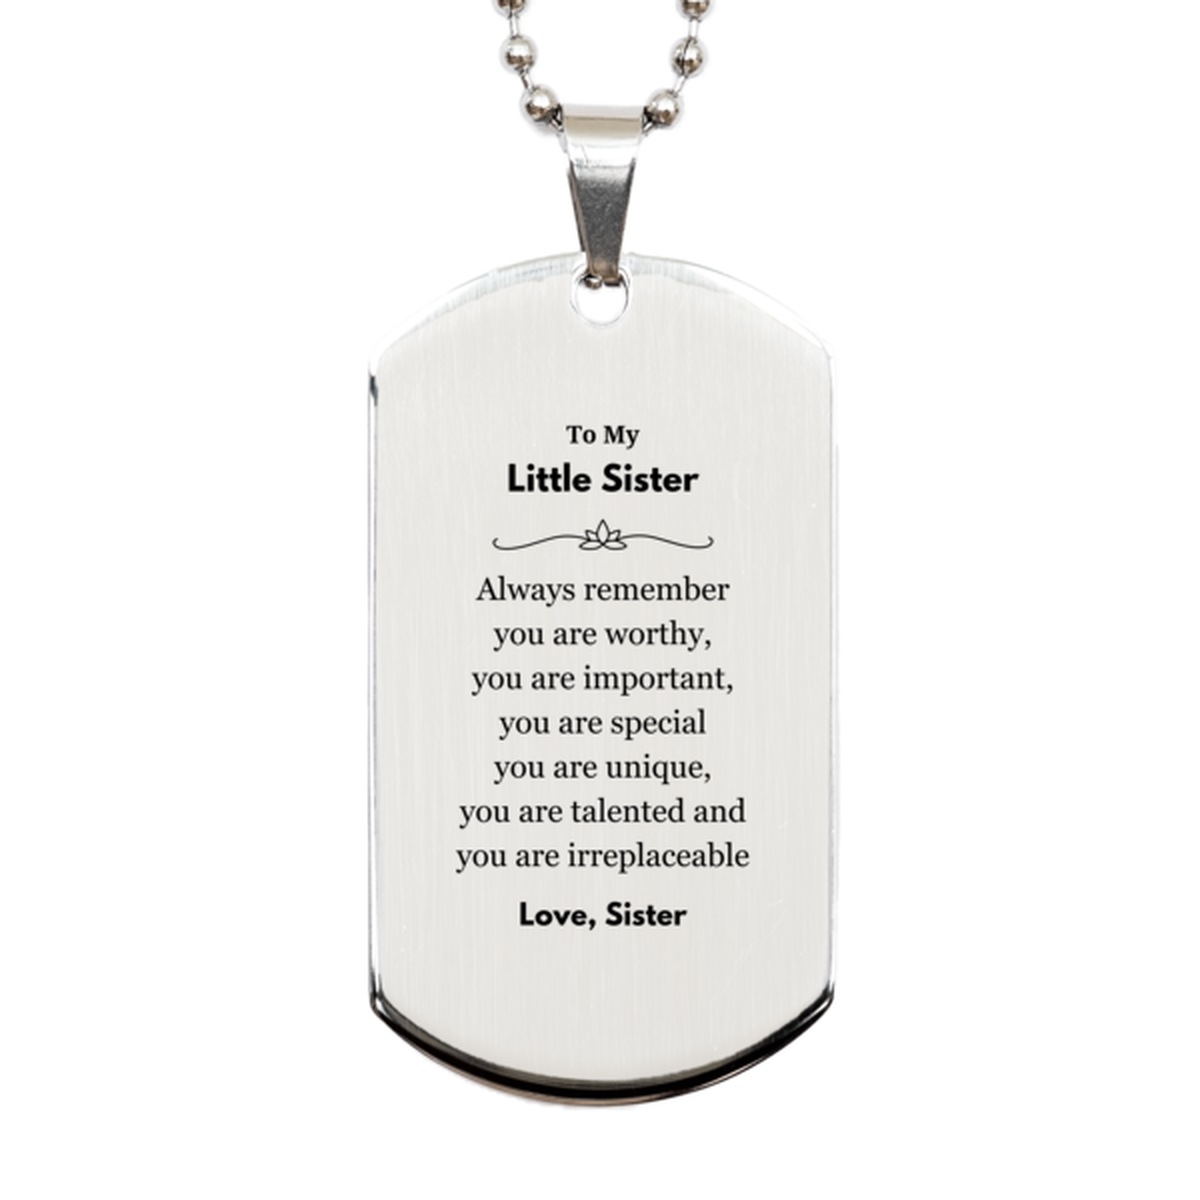 Little Sister Birthday Gifts from Sister, Inspirational Silver Dog Tag for Little Sister Christmas Graduation Gifts for Little Sister Always remember you are worthy, you are important. Love, Sister